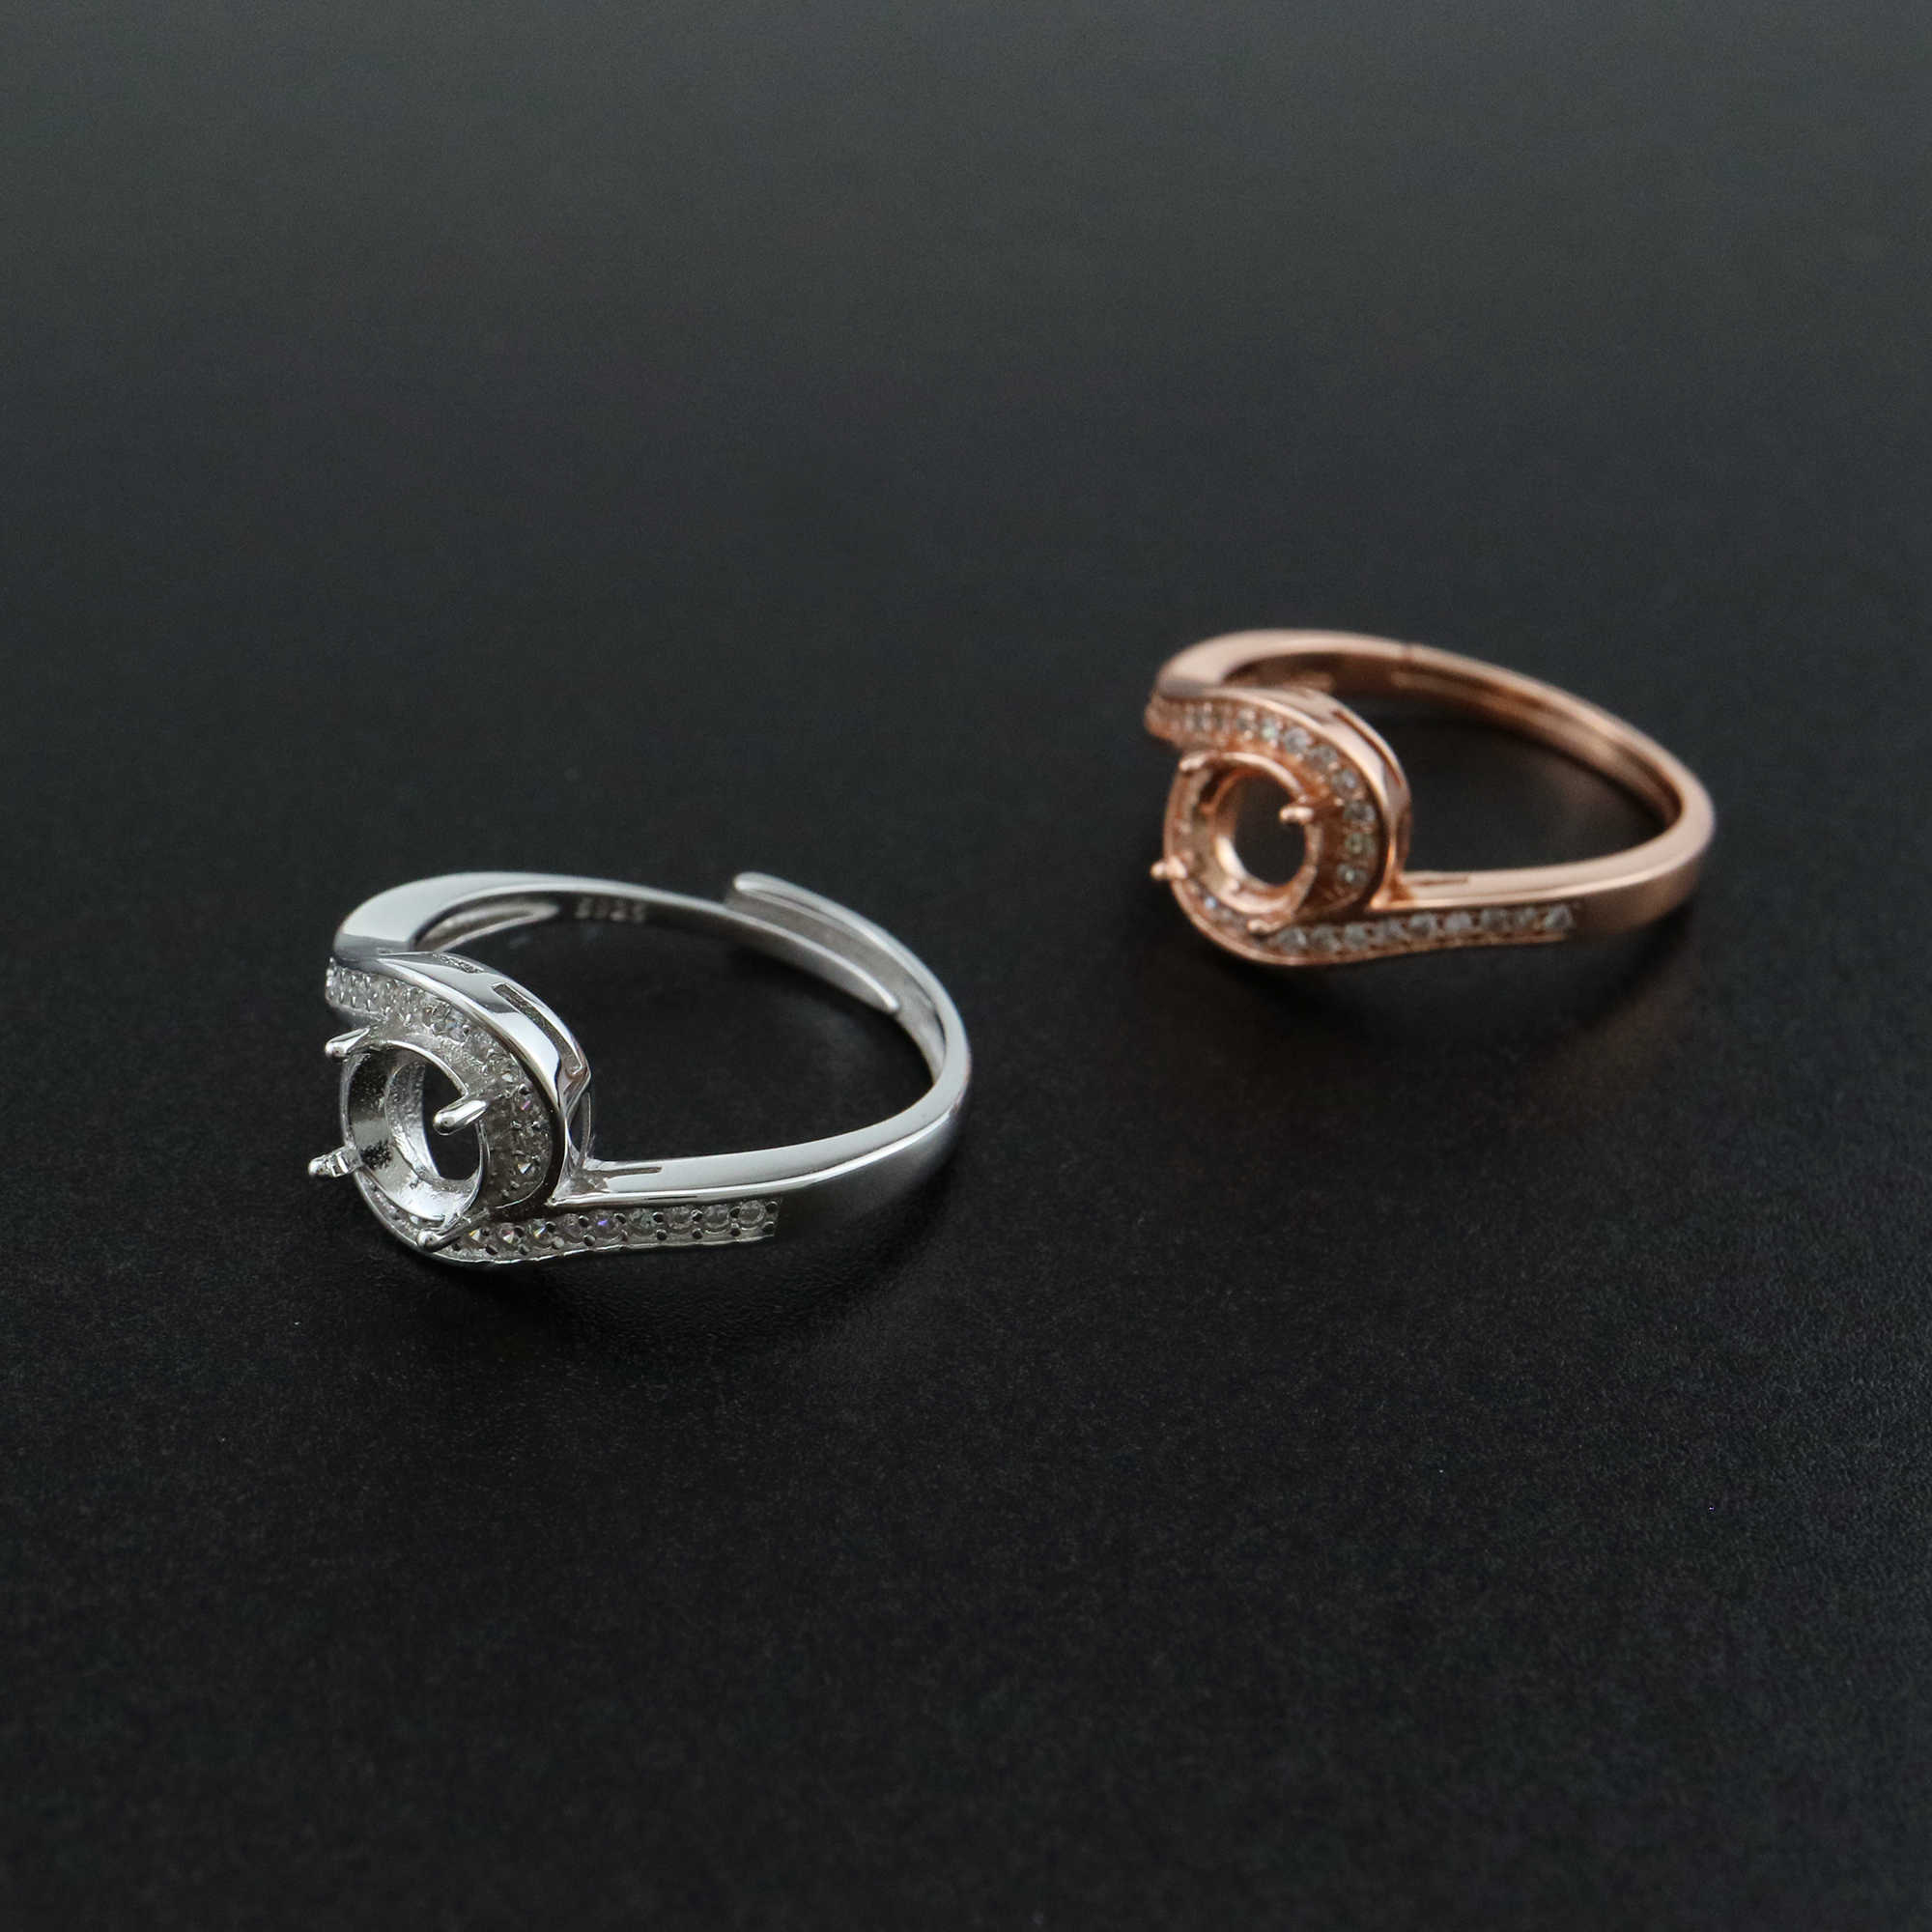 1Pcs 6MM Bypass Shank Round Prong Bezel Rose Gold Plated Solid 925 Sterling Silver Adjustable Ring Settings for Moissanite Gemstone DIY Supplies 1210055 - Click Image to Close